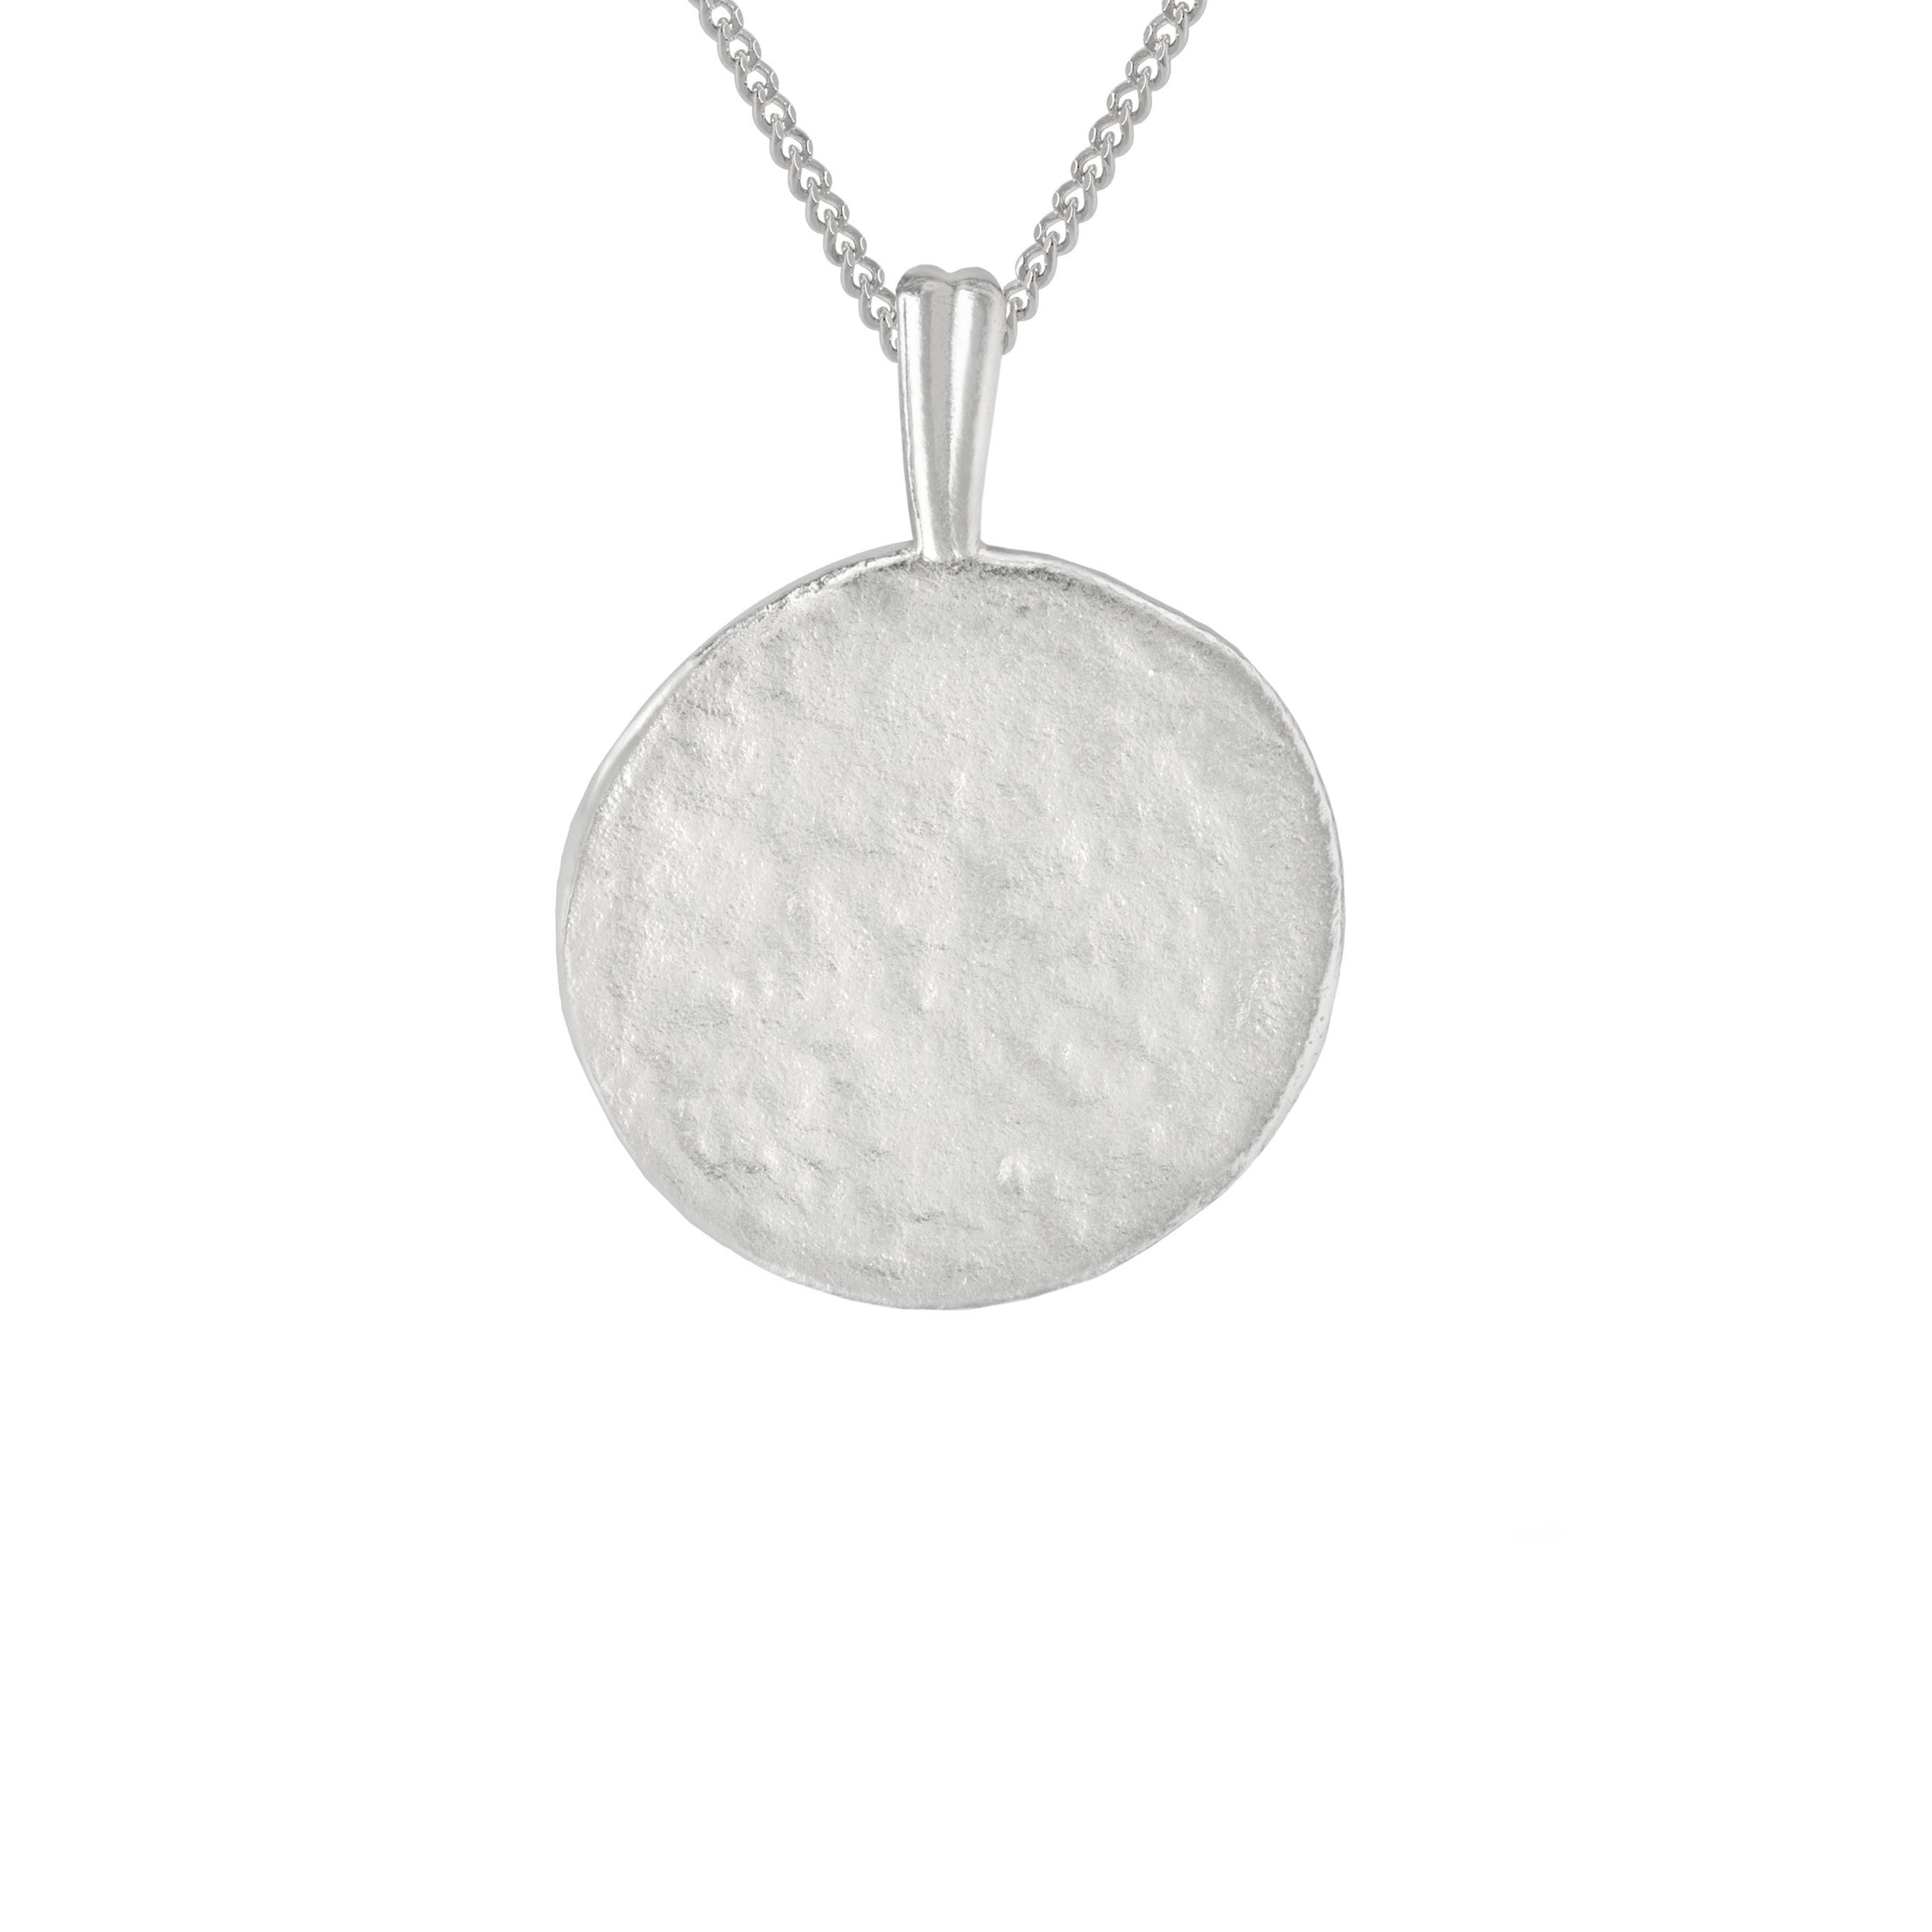 Aries Zodiac Pendant Necklace in Silver back of pendant